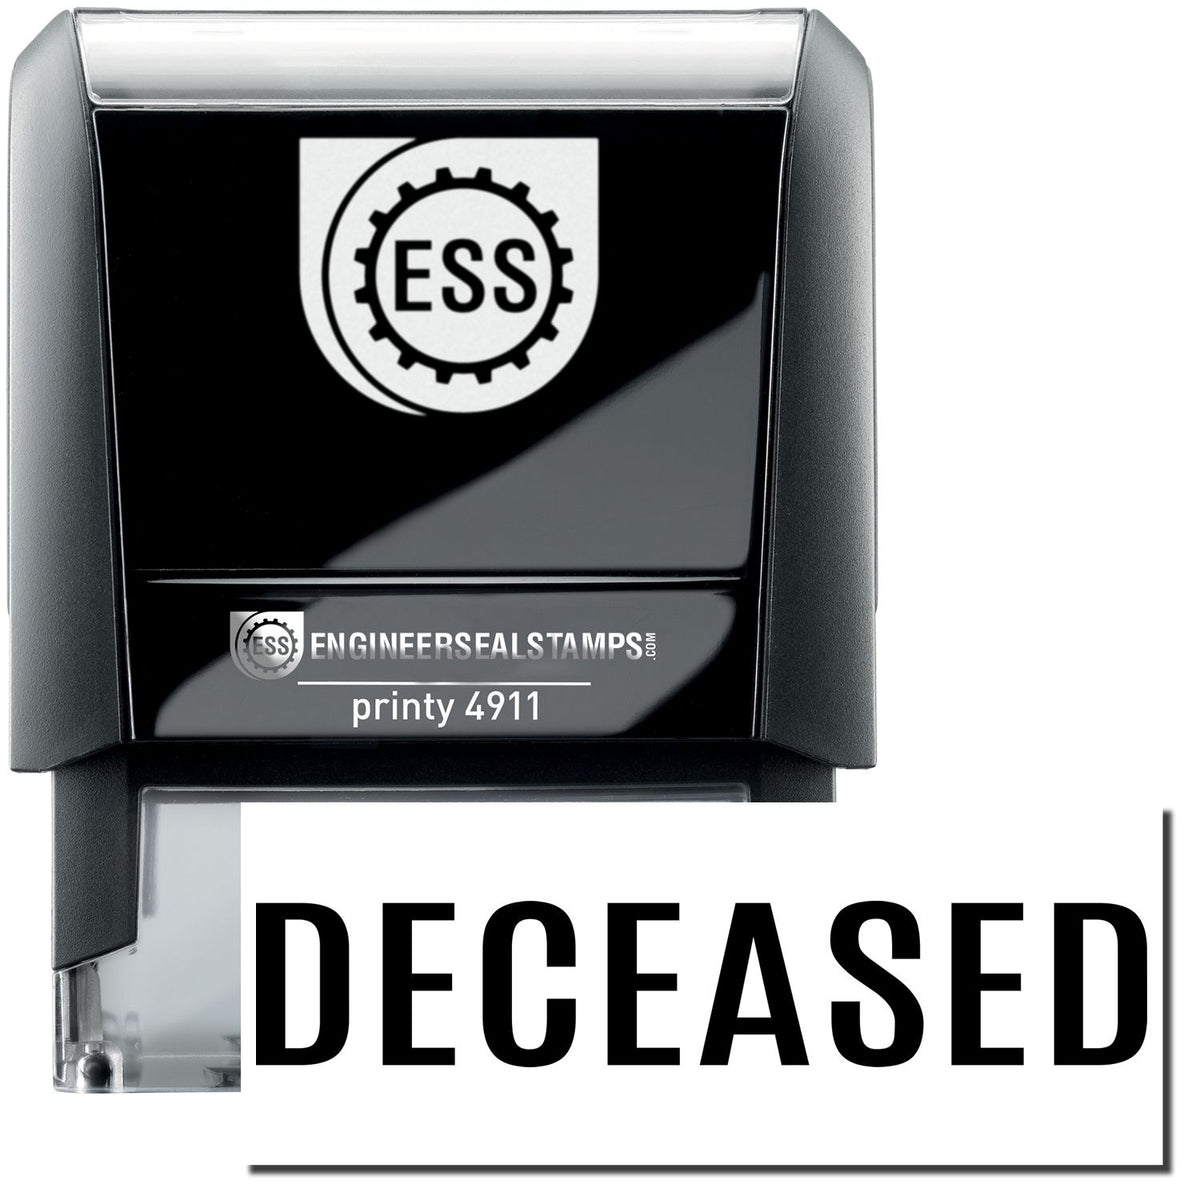 A self-inking stamp with a stamped image showing how the text &quot;DECEASED&quot; in bold font is displayed after stamping.